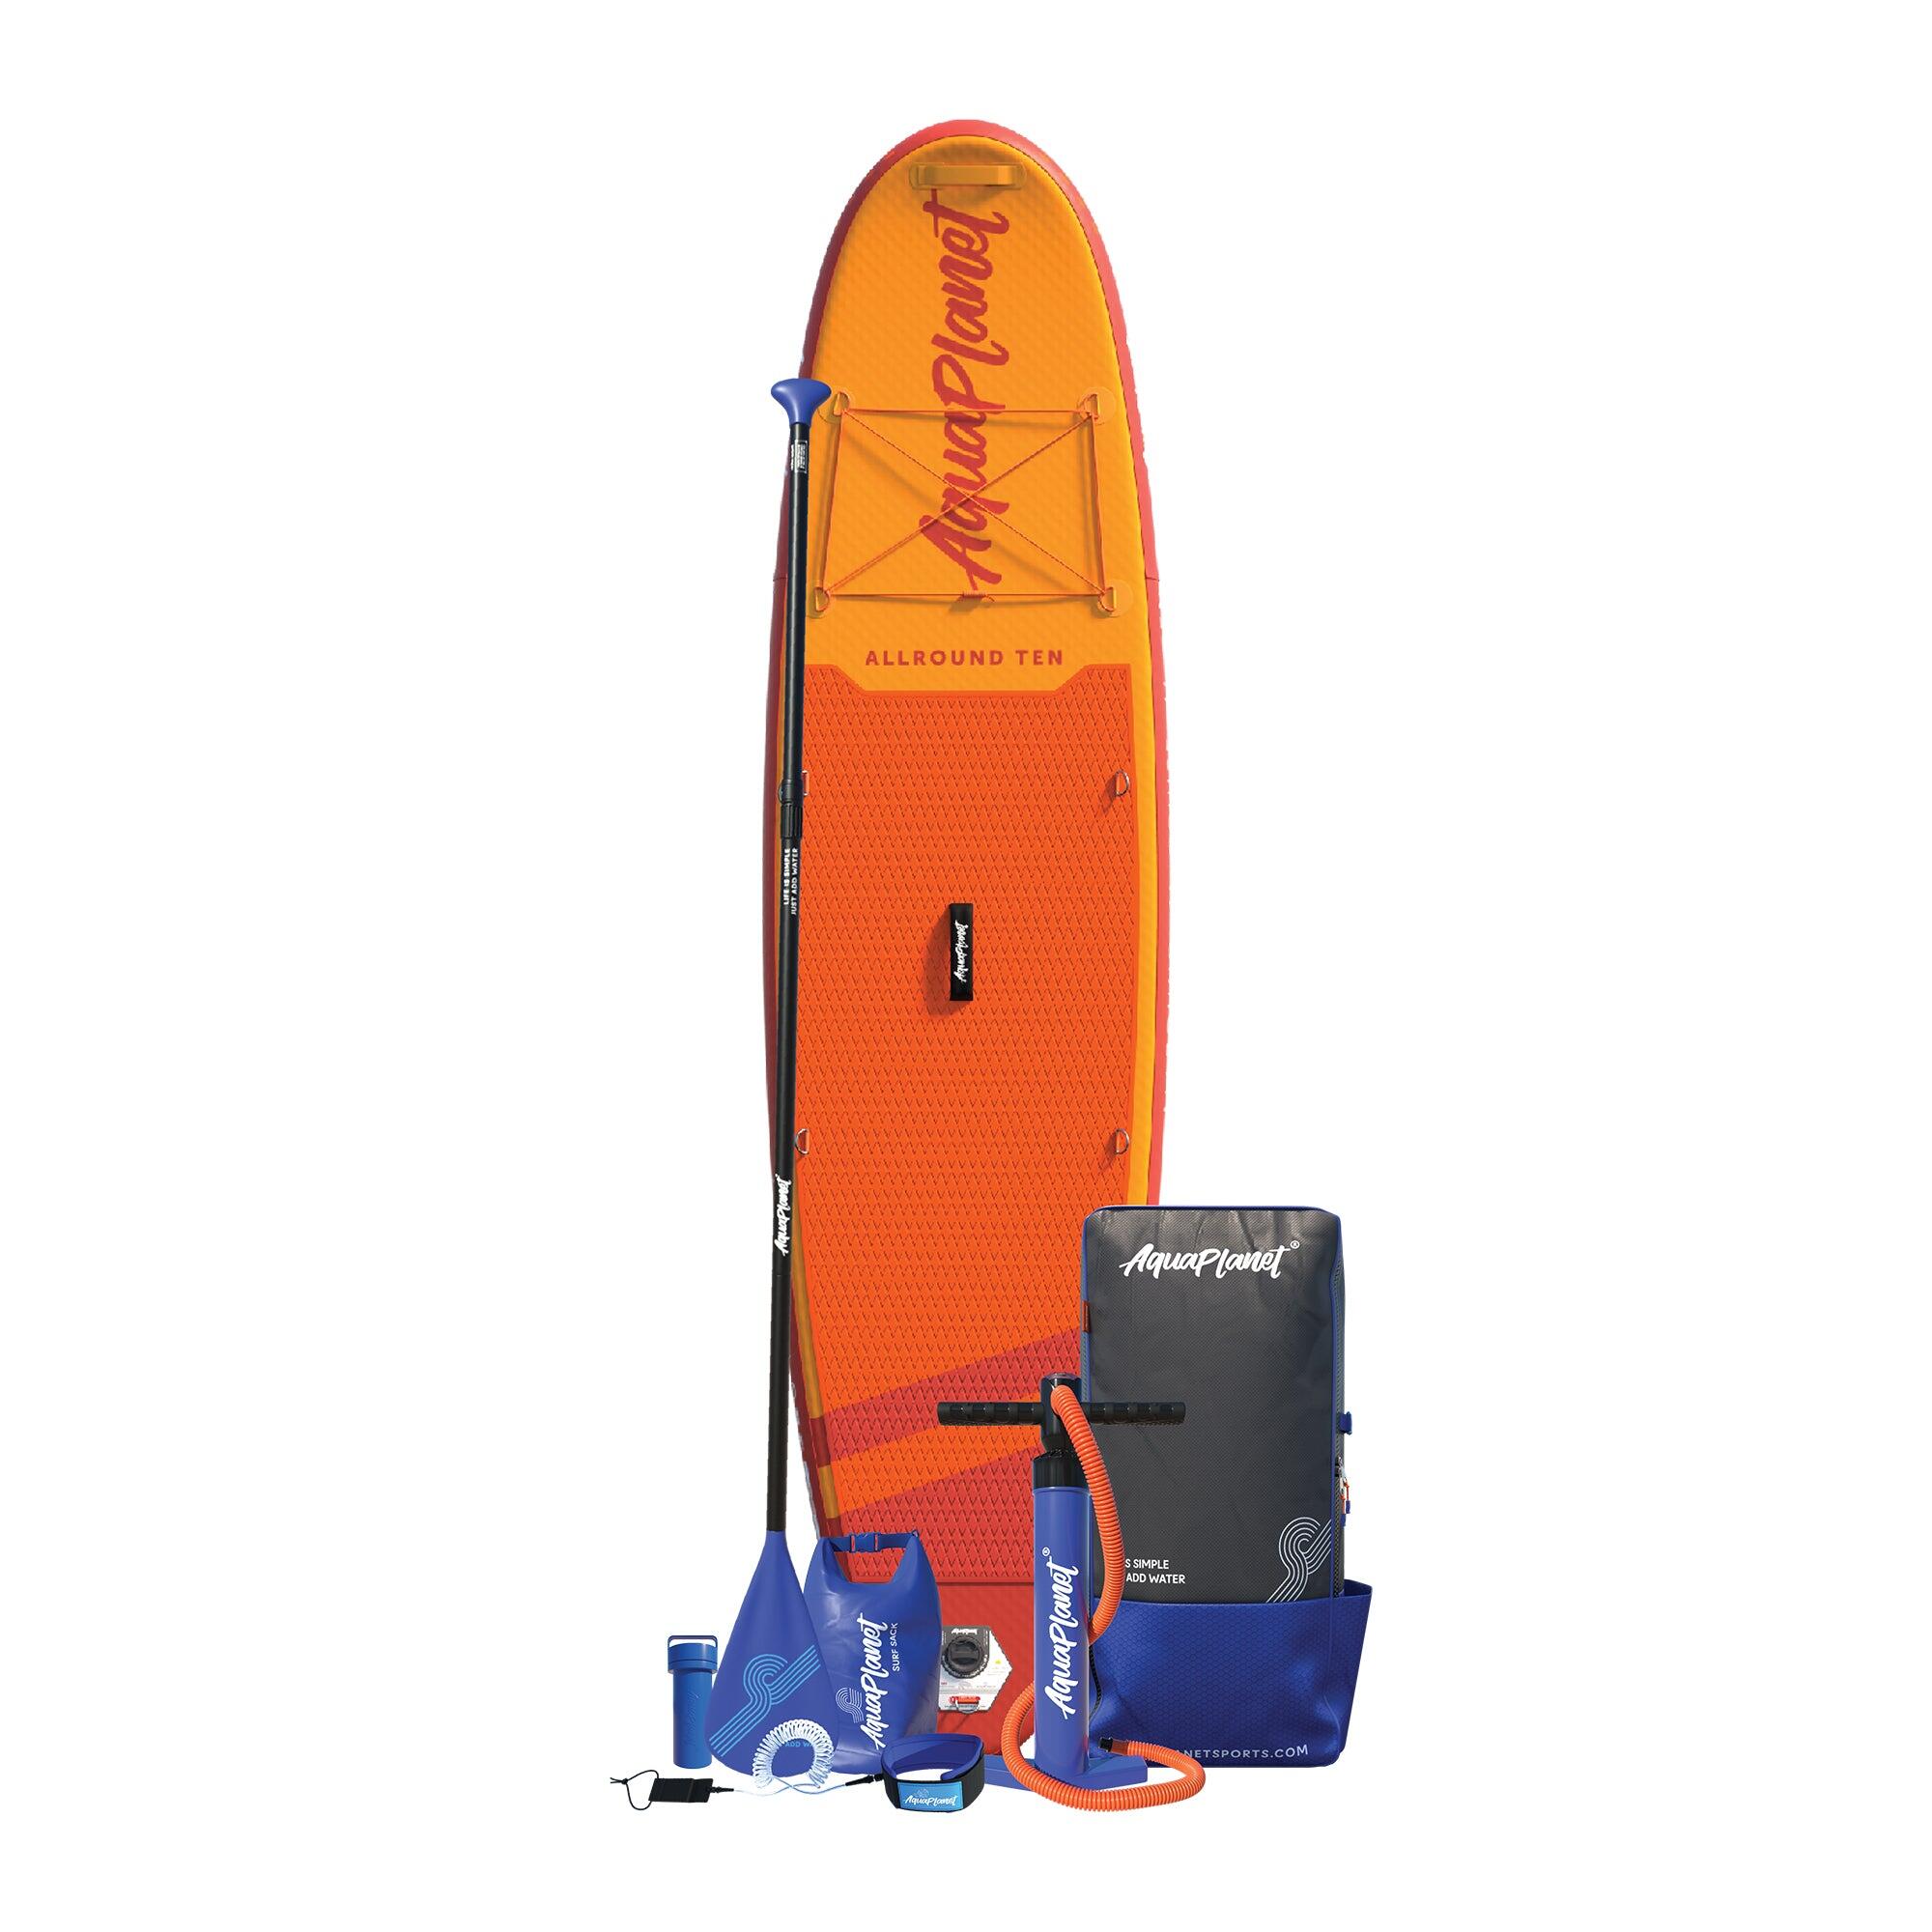 Aquaplanet ALLROUND TEN 10’ Inflatable Paddle Board Package - Orange 2/5